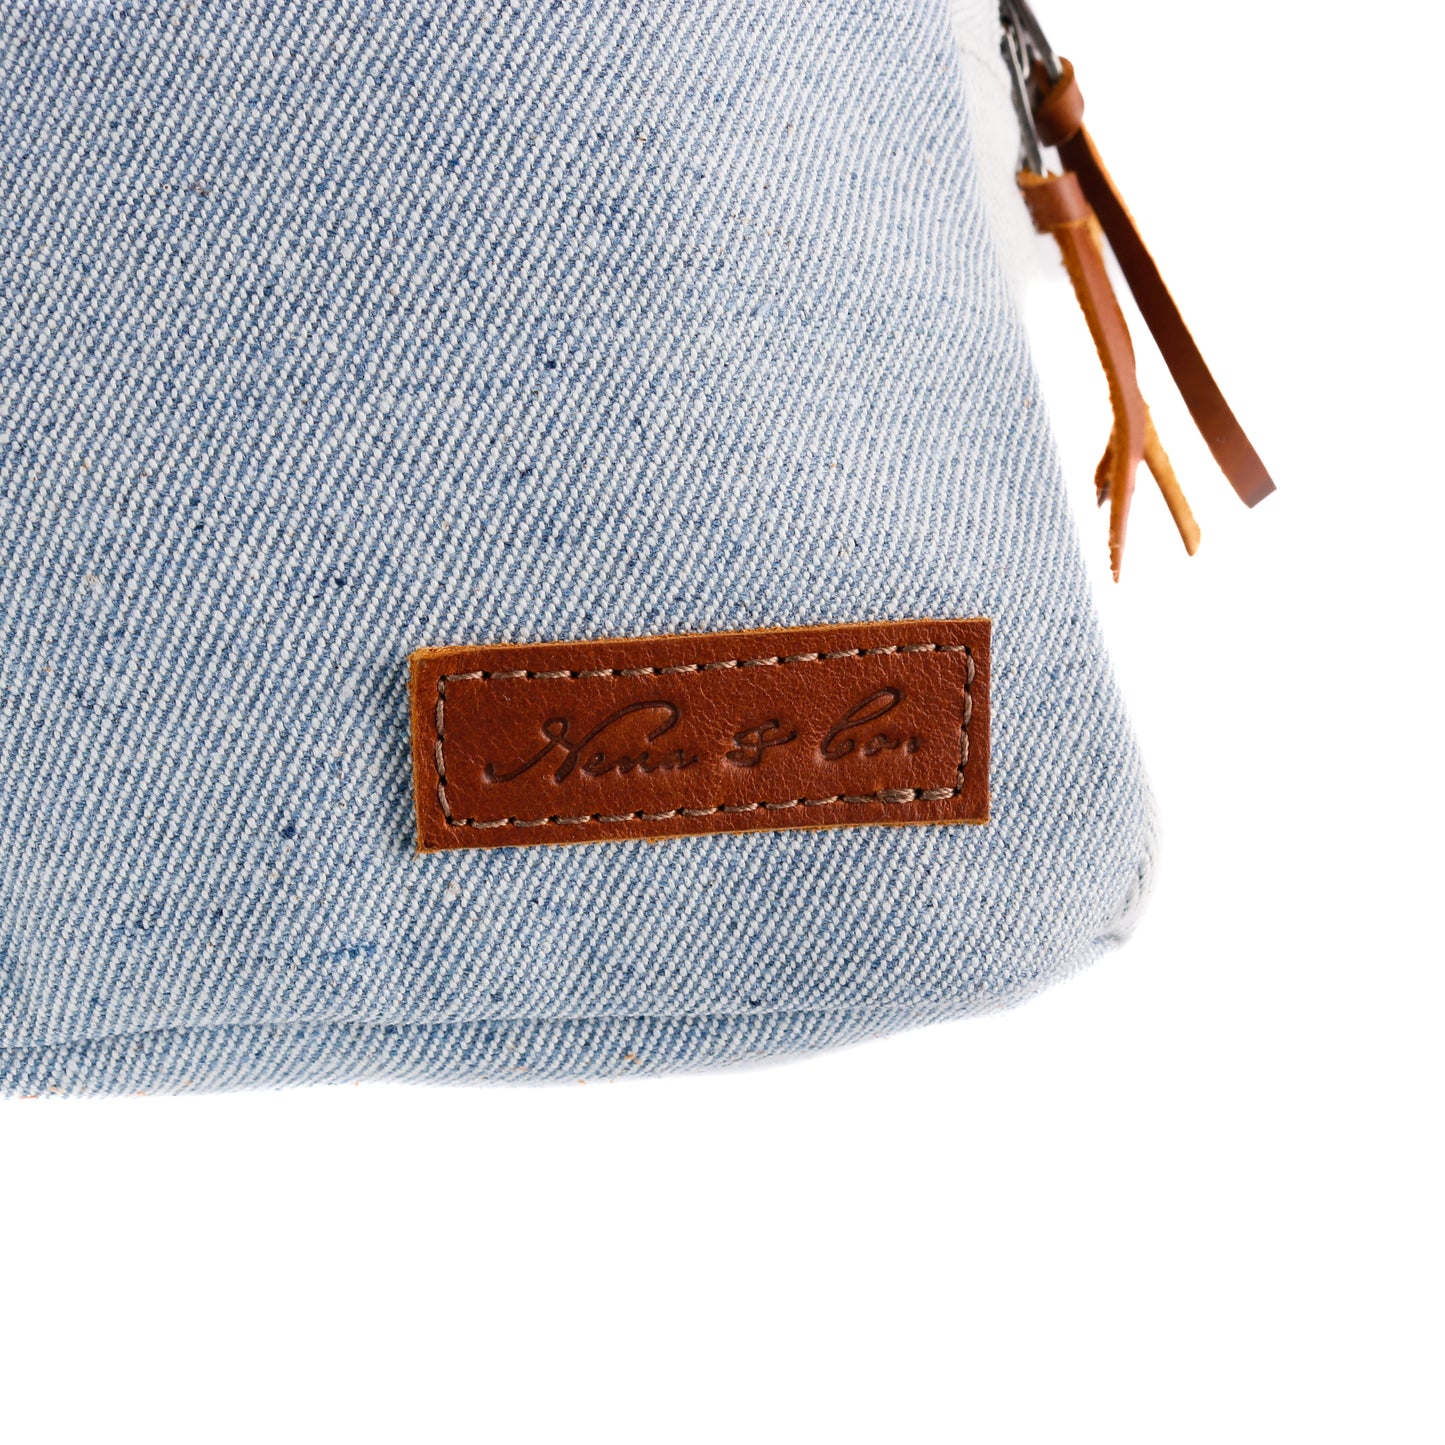 CROSSBODY SLING 2.0 - UPCYCLED DENIM WITH PATCH - CAFE - NO. 11336